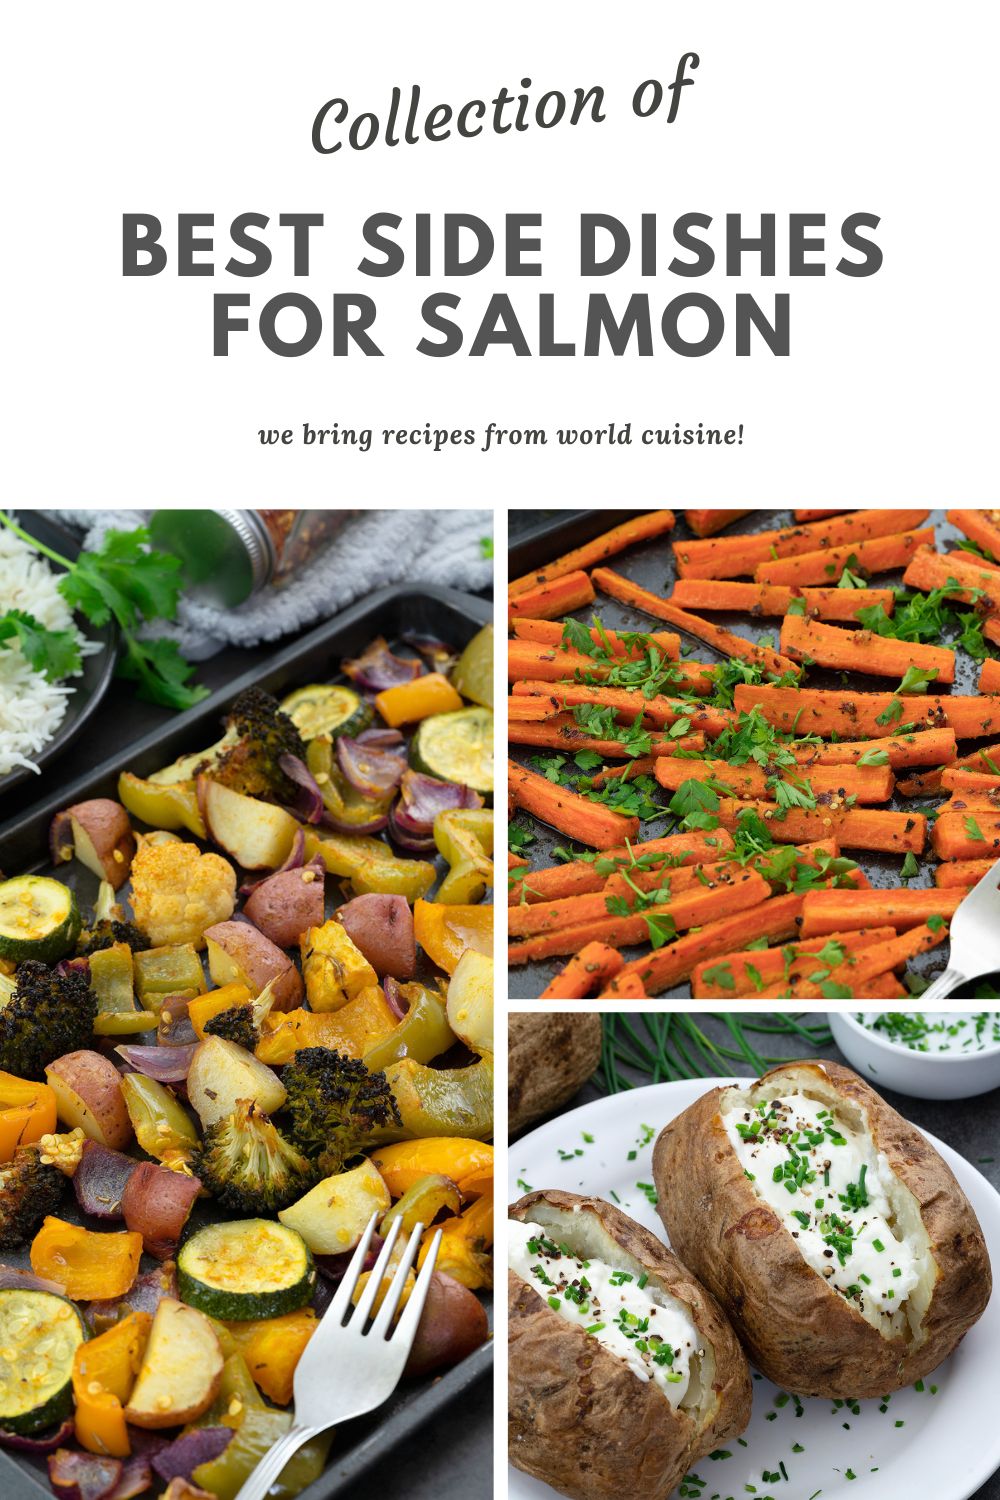 Image collage of best side dishes for salmon.